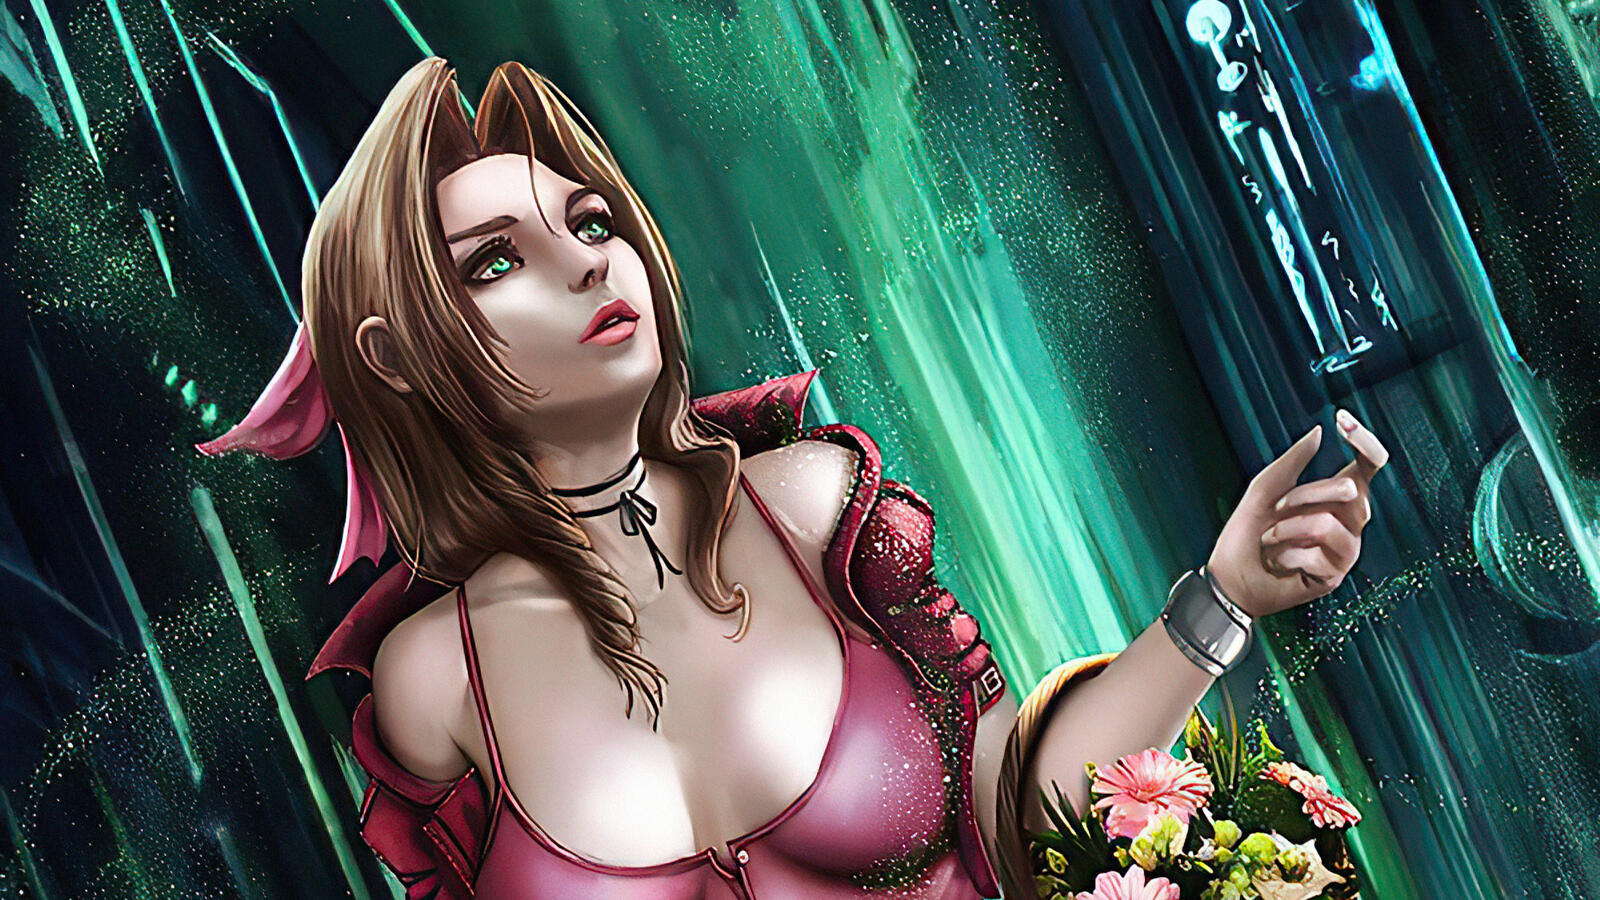 Wallpapers aerith gainsborough Final Fantasy games on the desktop